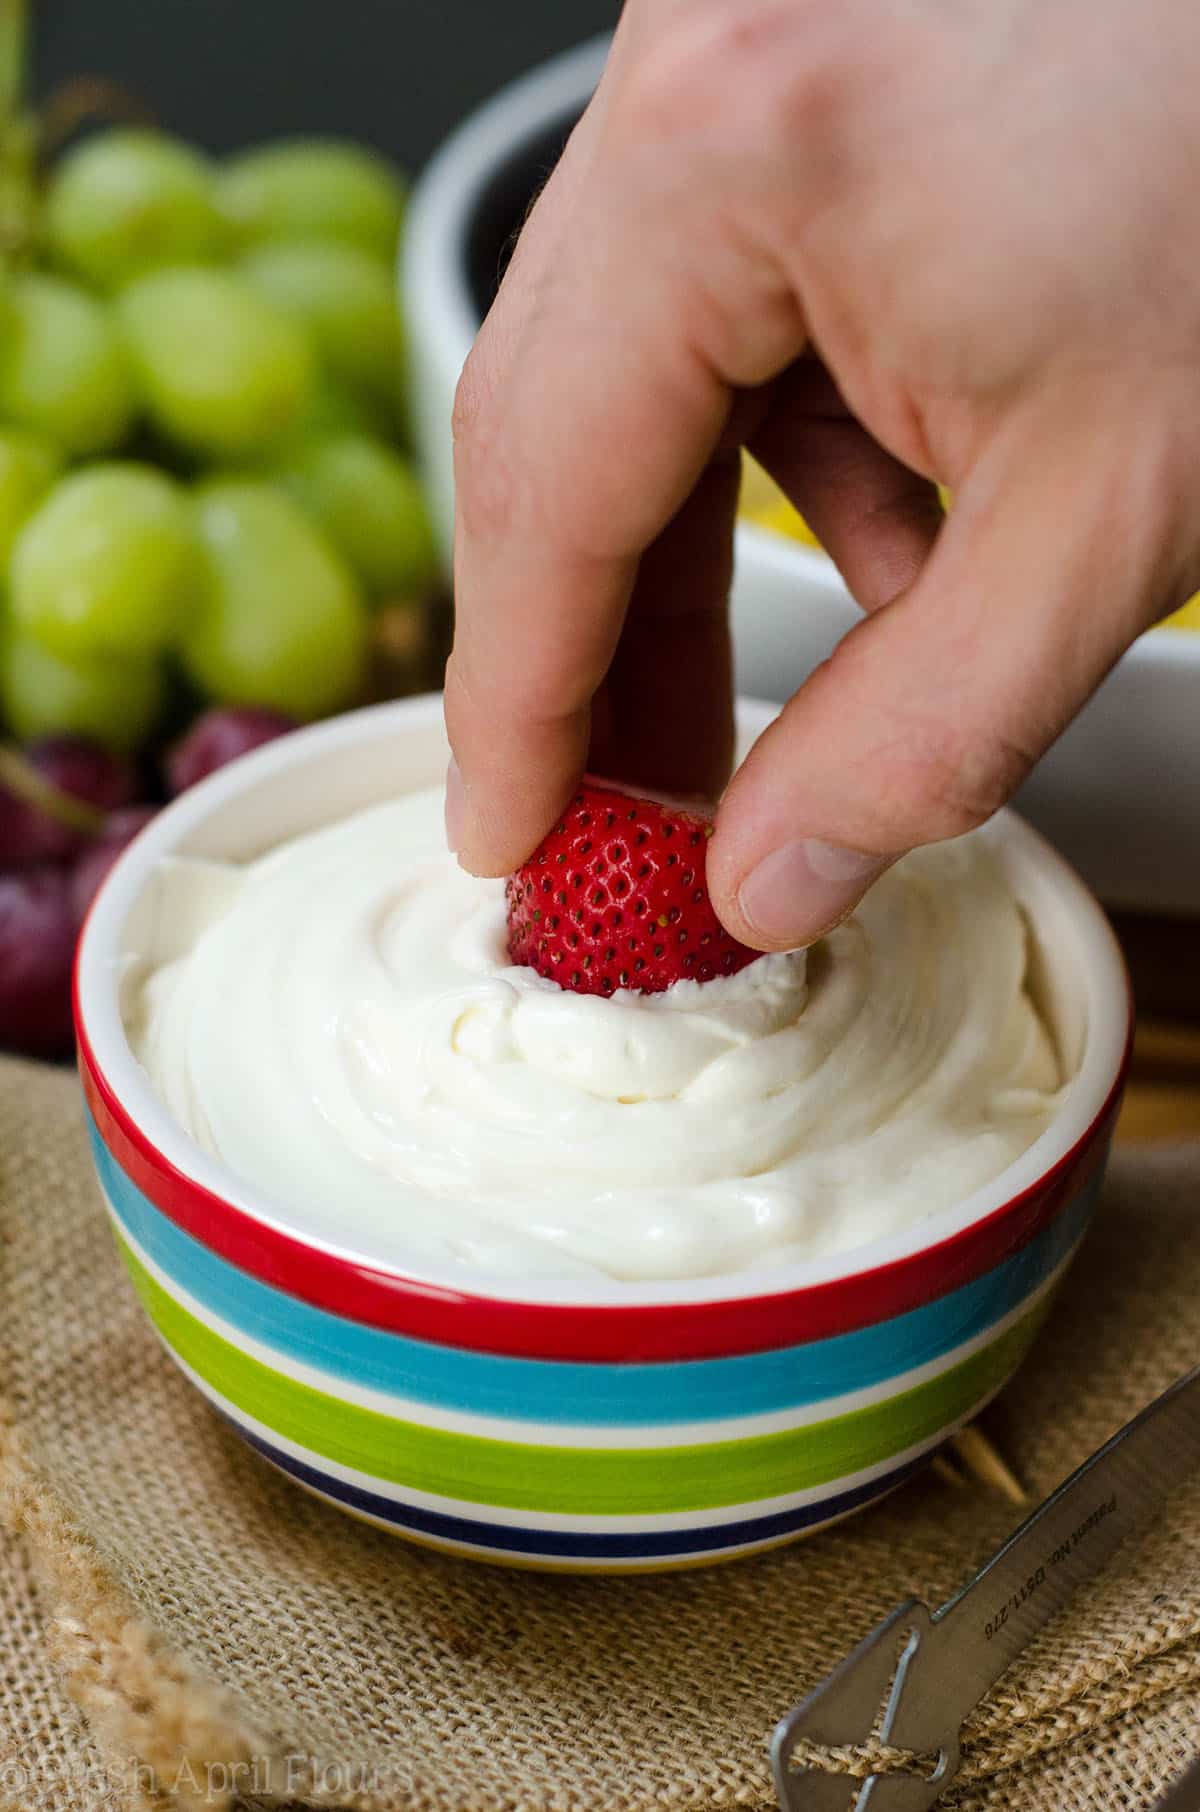 hand dipping a strawberry into fruit dip